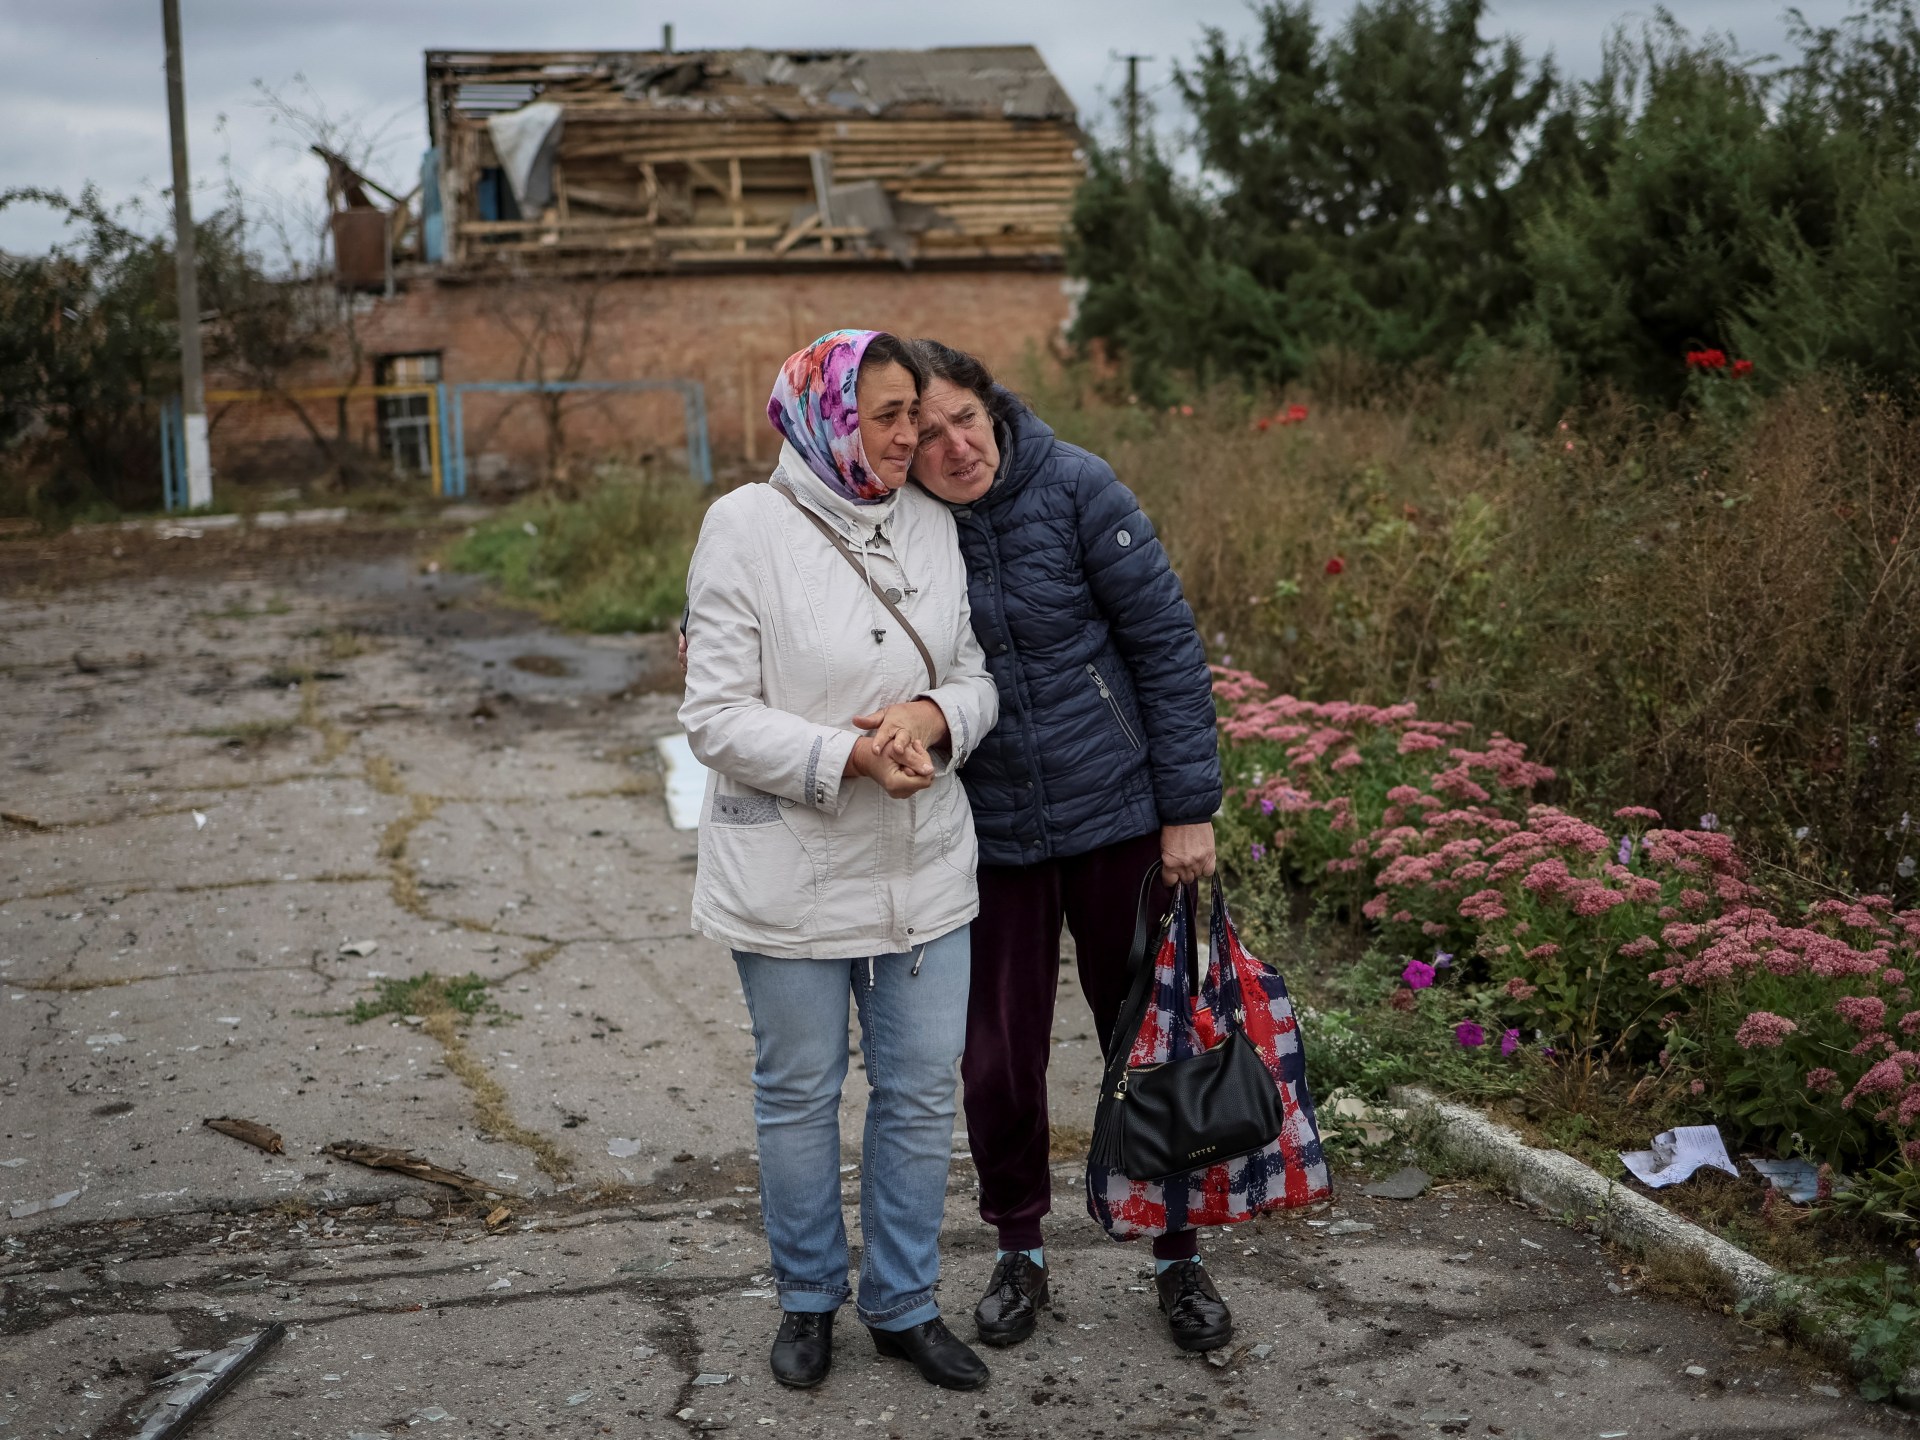 UN experts conclude war crimes committed in Ukraine conflict